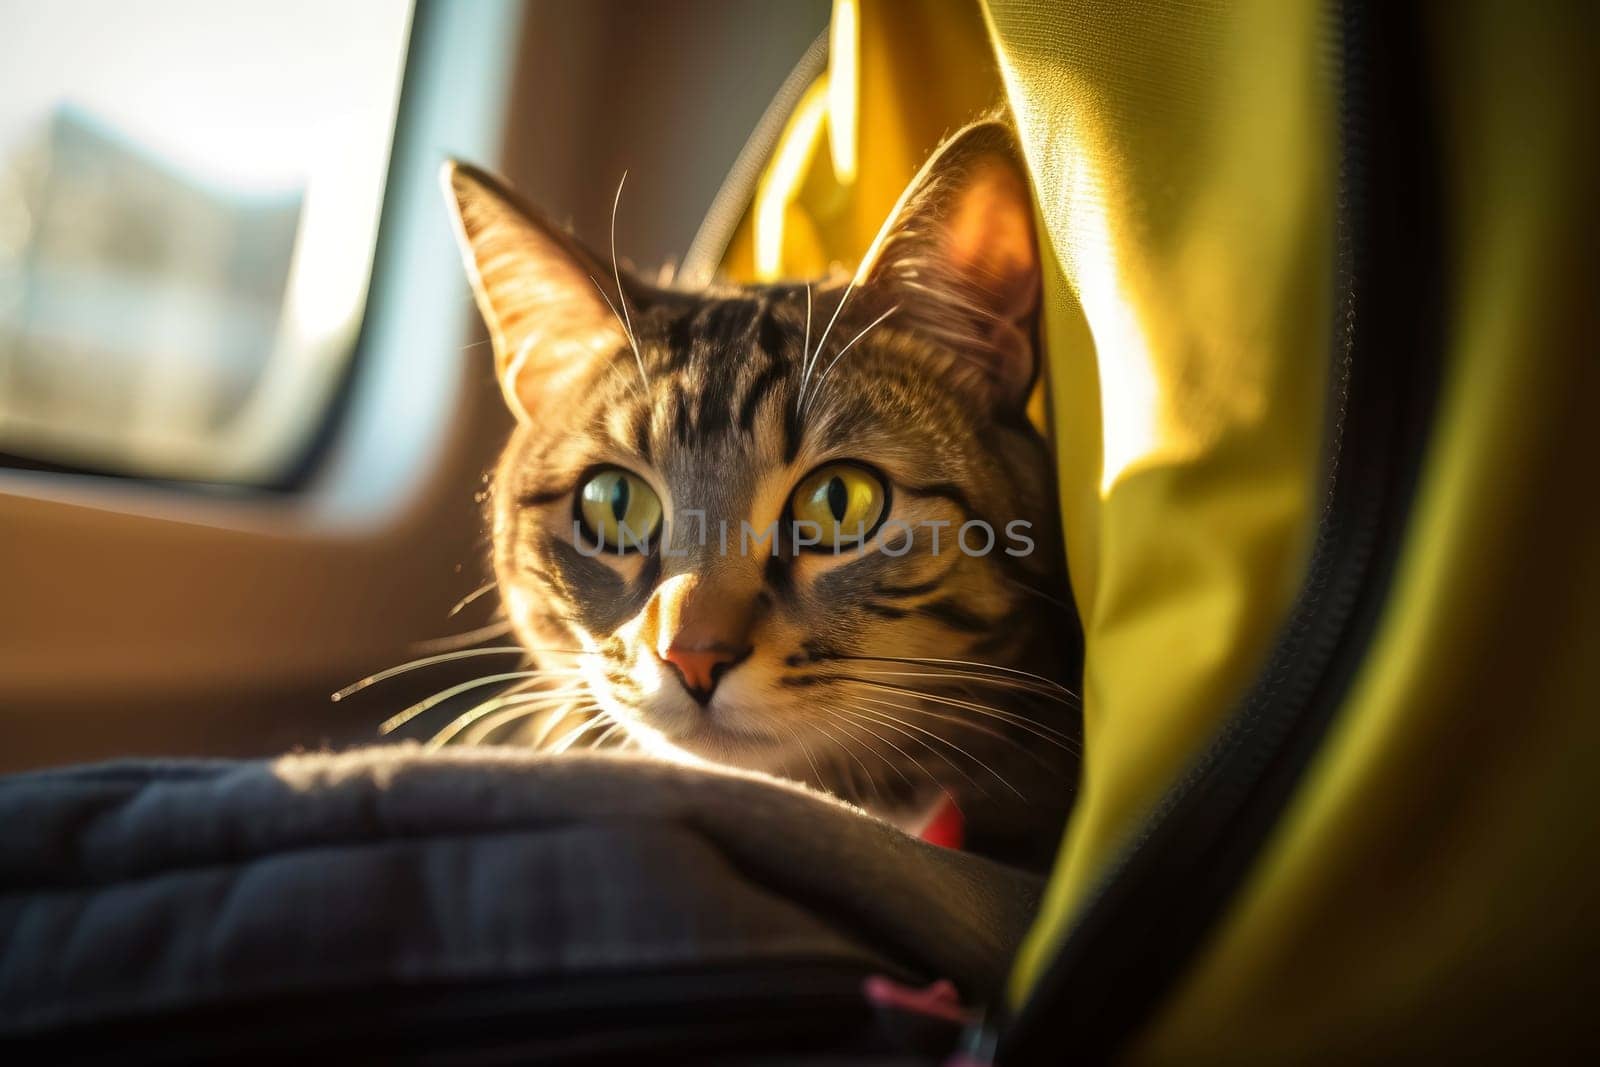 Cat peeking out of pet carrier bag in sunlit vehicle. Candid pet travel concept. Design for pet accessories promotion, travel banner